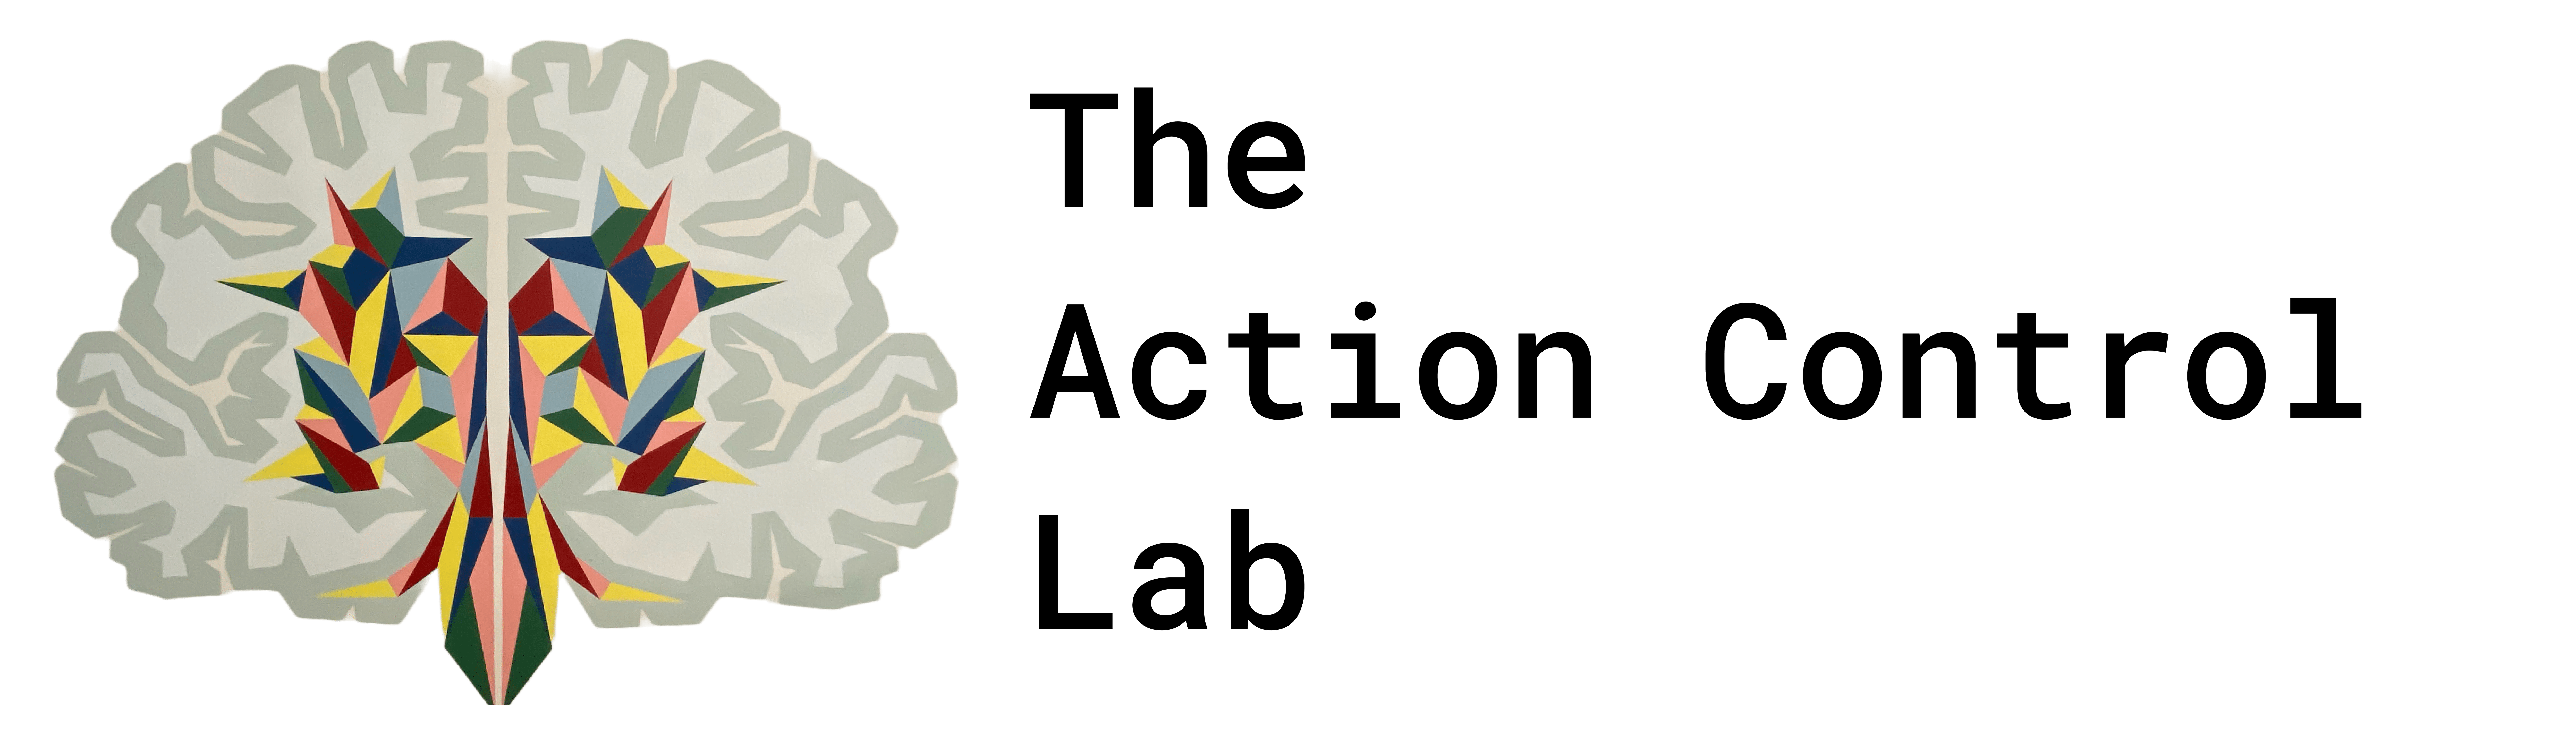 The Action Control Lab